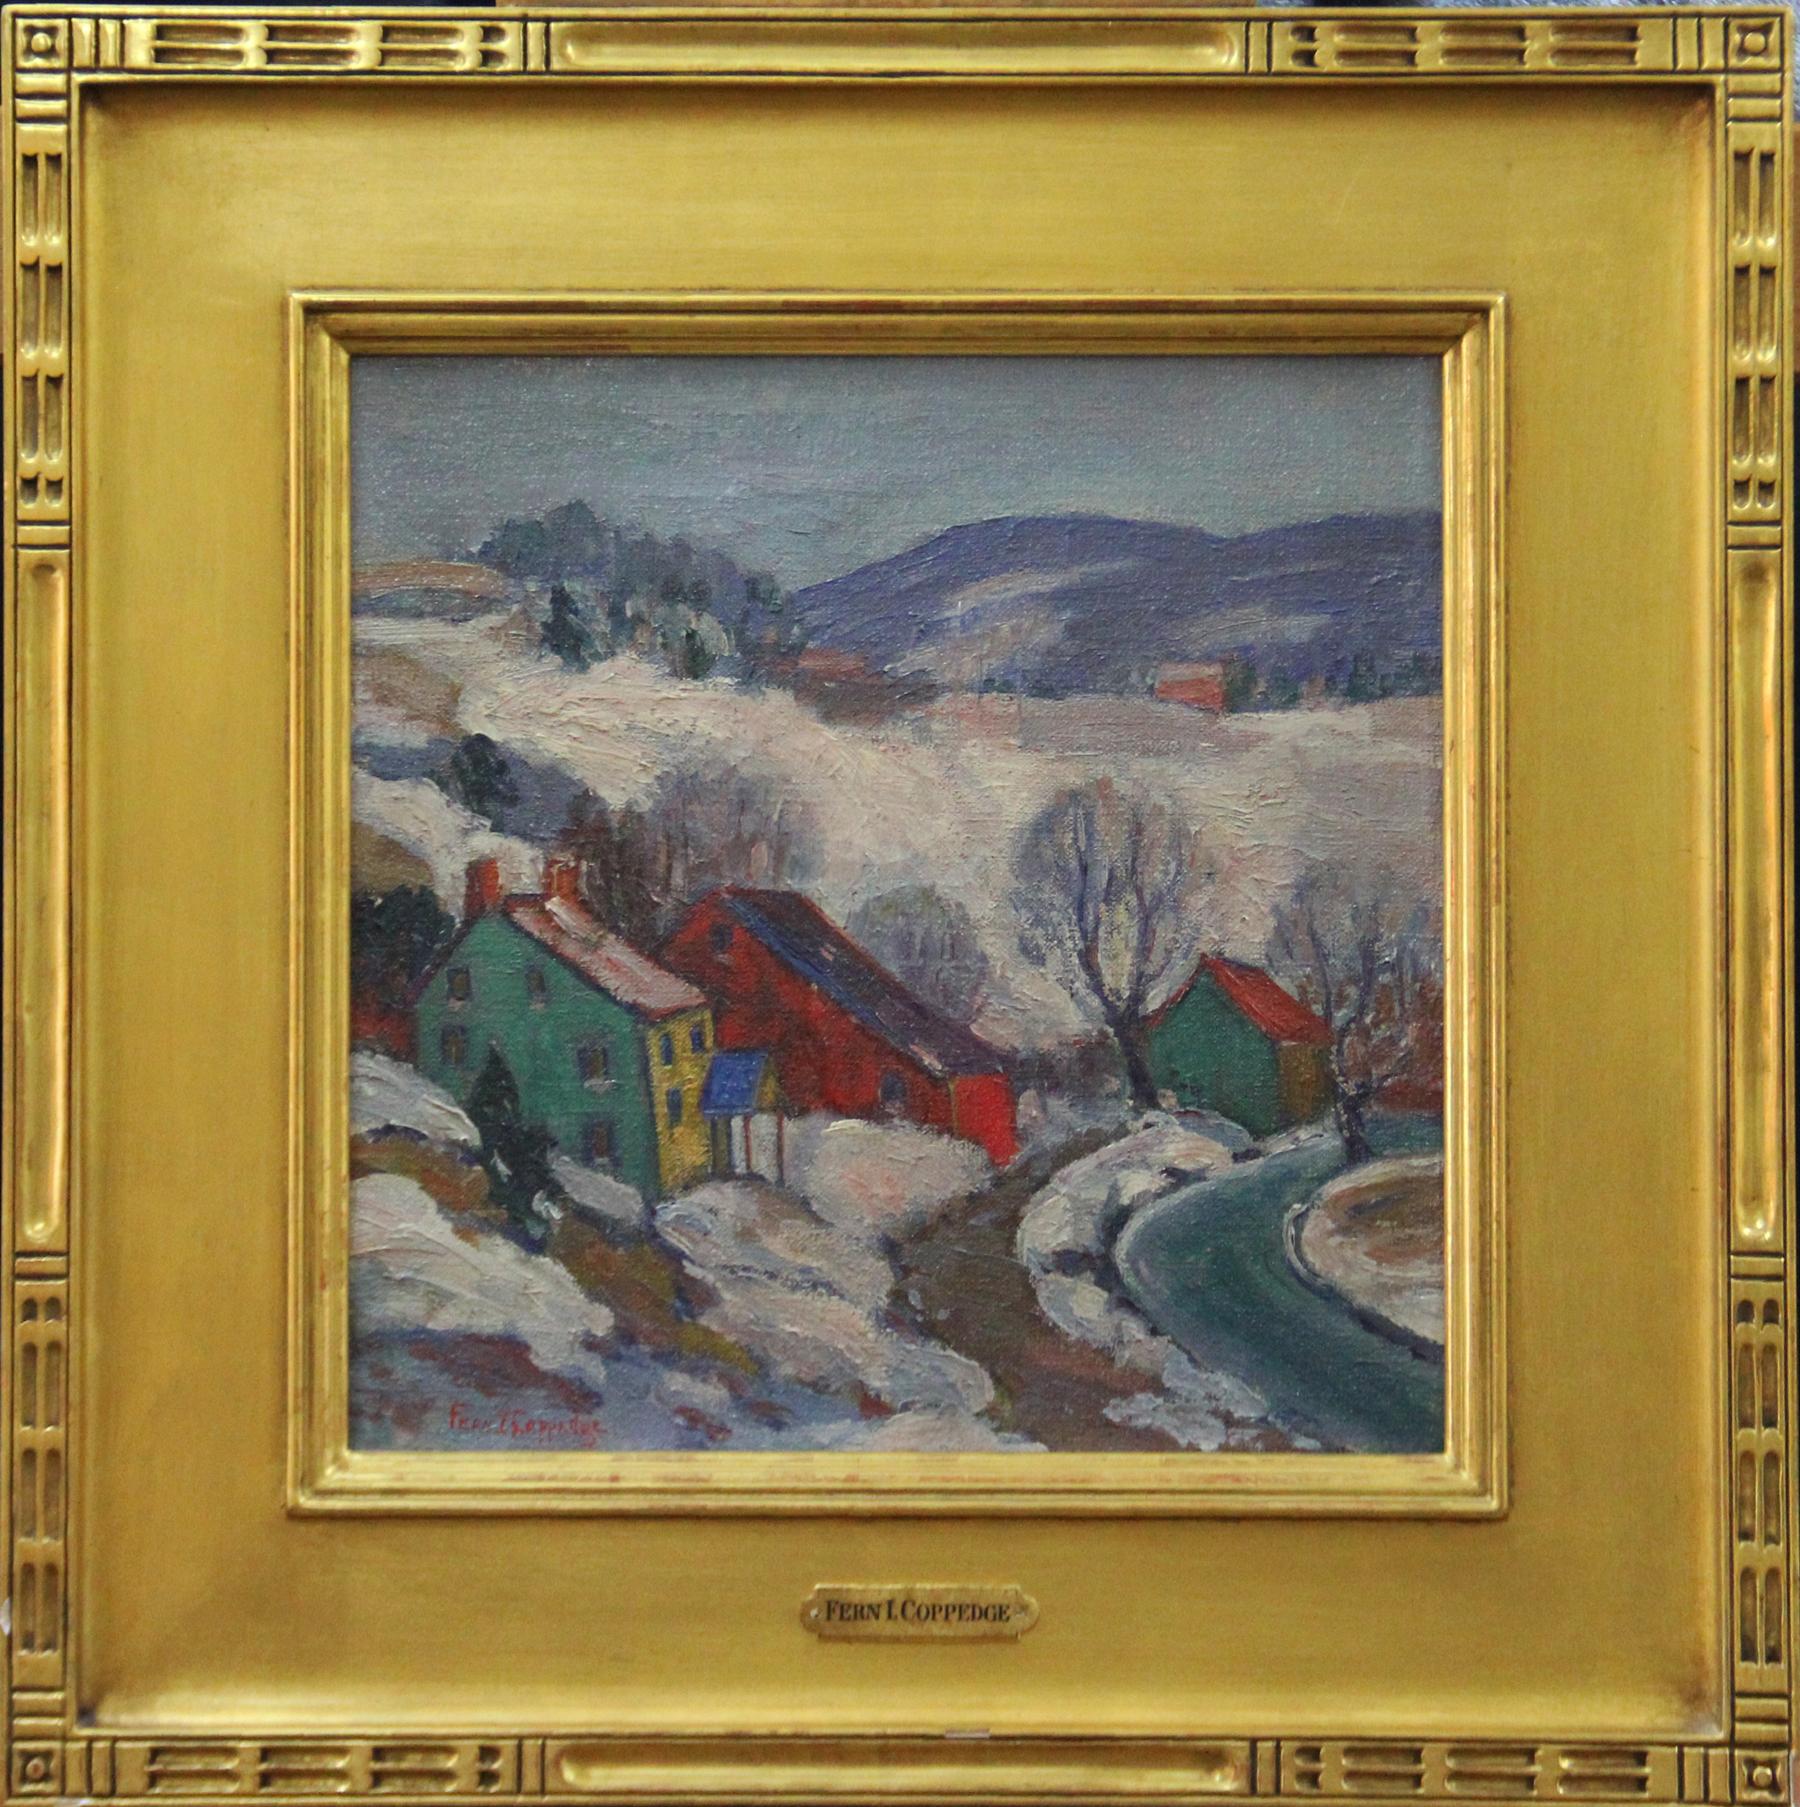 "Winter Scene" by Fern Isabel Coppedge is a 12" x 12" oil on canvas Pennsylvania Impressionist painting. It comes from a private collection in Bryn Mawr, Pennsylvania, it is framed in a 22K gold reproduction frame and in excellent, original